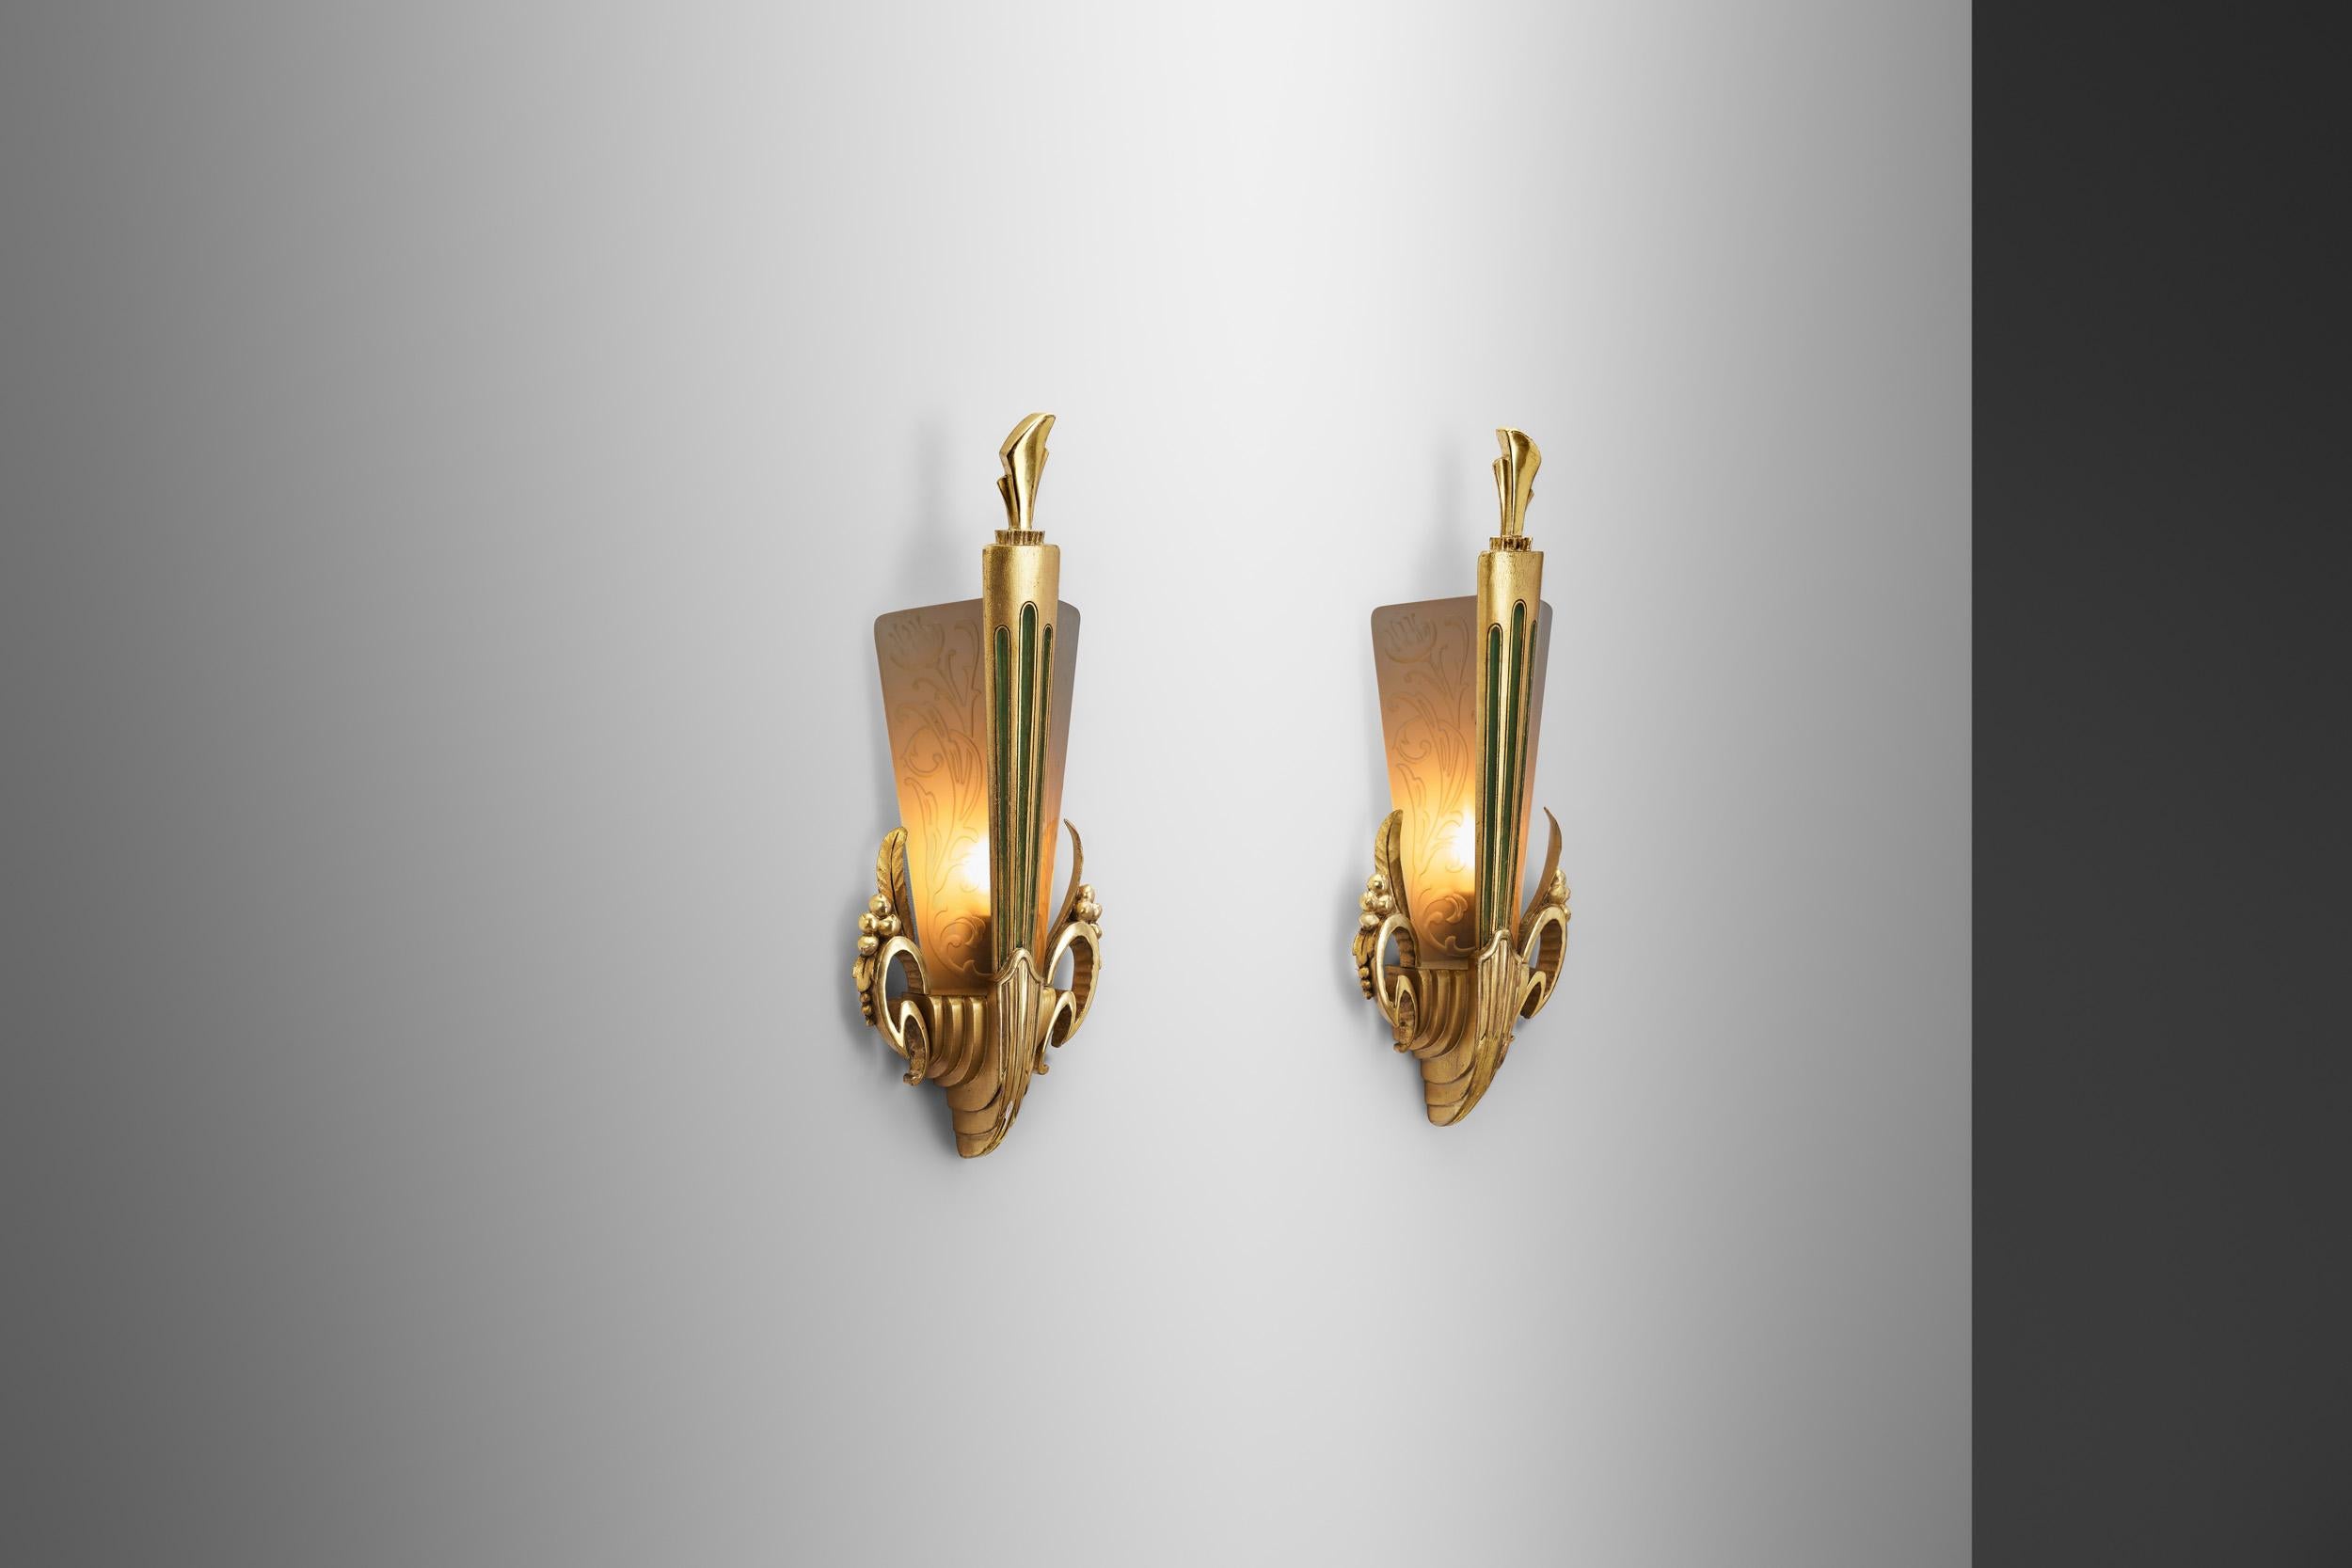 Standing as evidence of the inventiveness and timeless glamour of Art Nouveau is this pair of ornamented wall lights. These lights were designed to show off the dynamic elegance that symbolized the era’s rich cultural scene in Europe and even today,